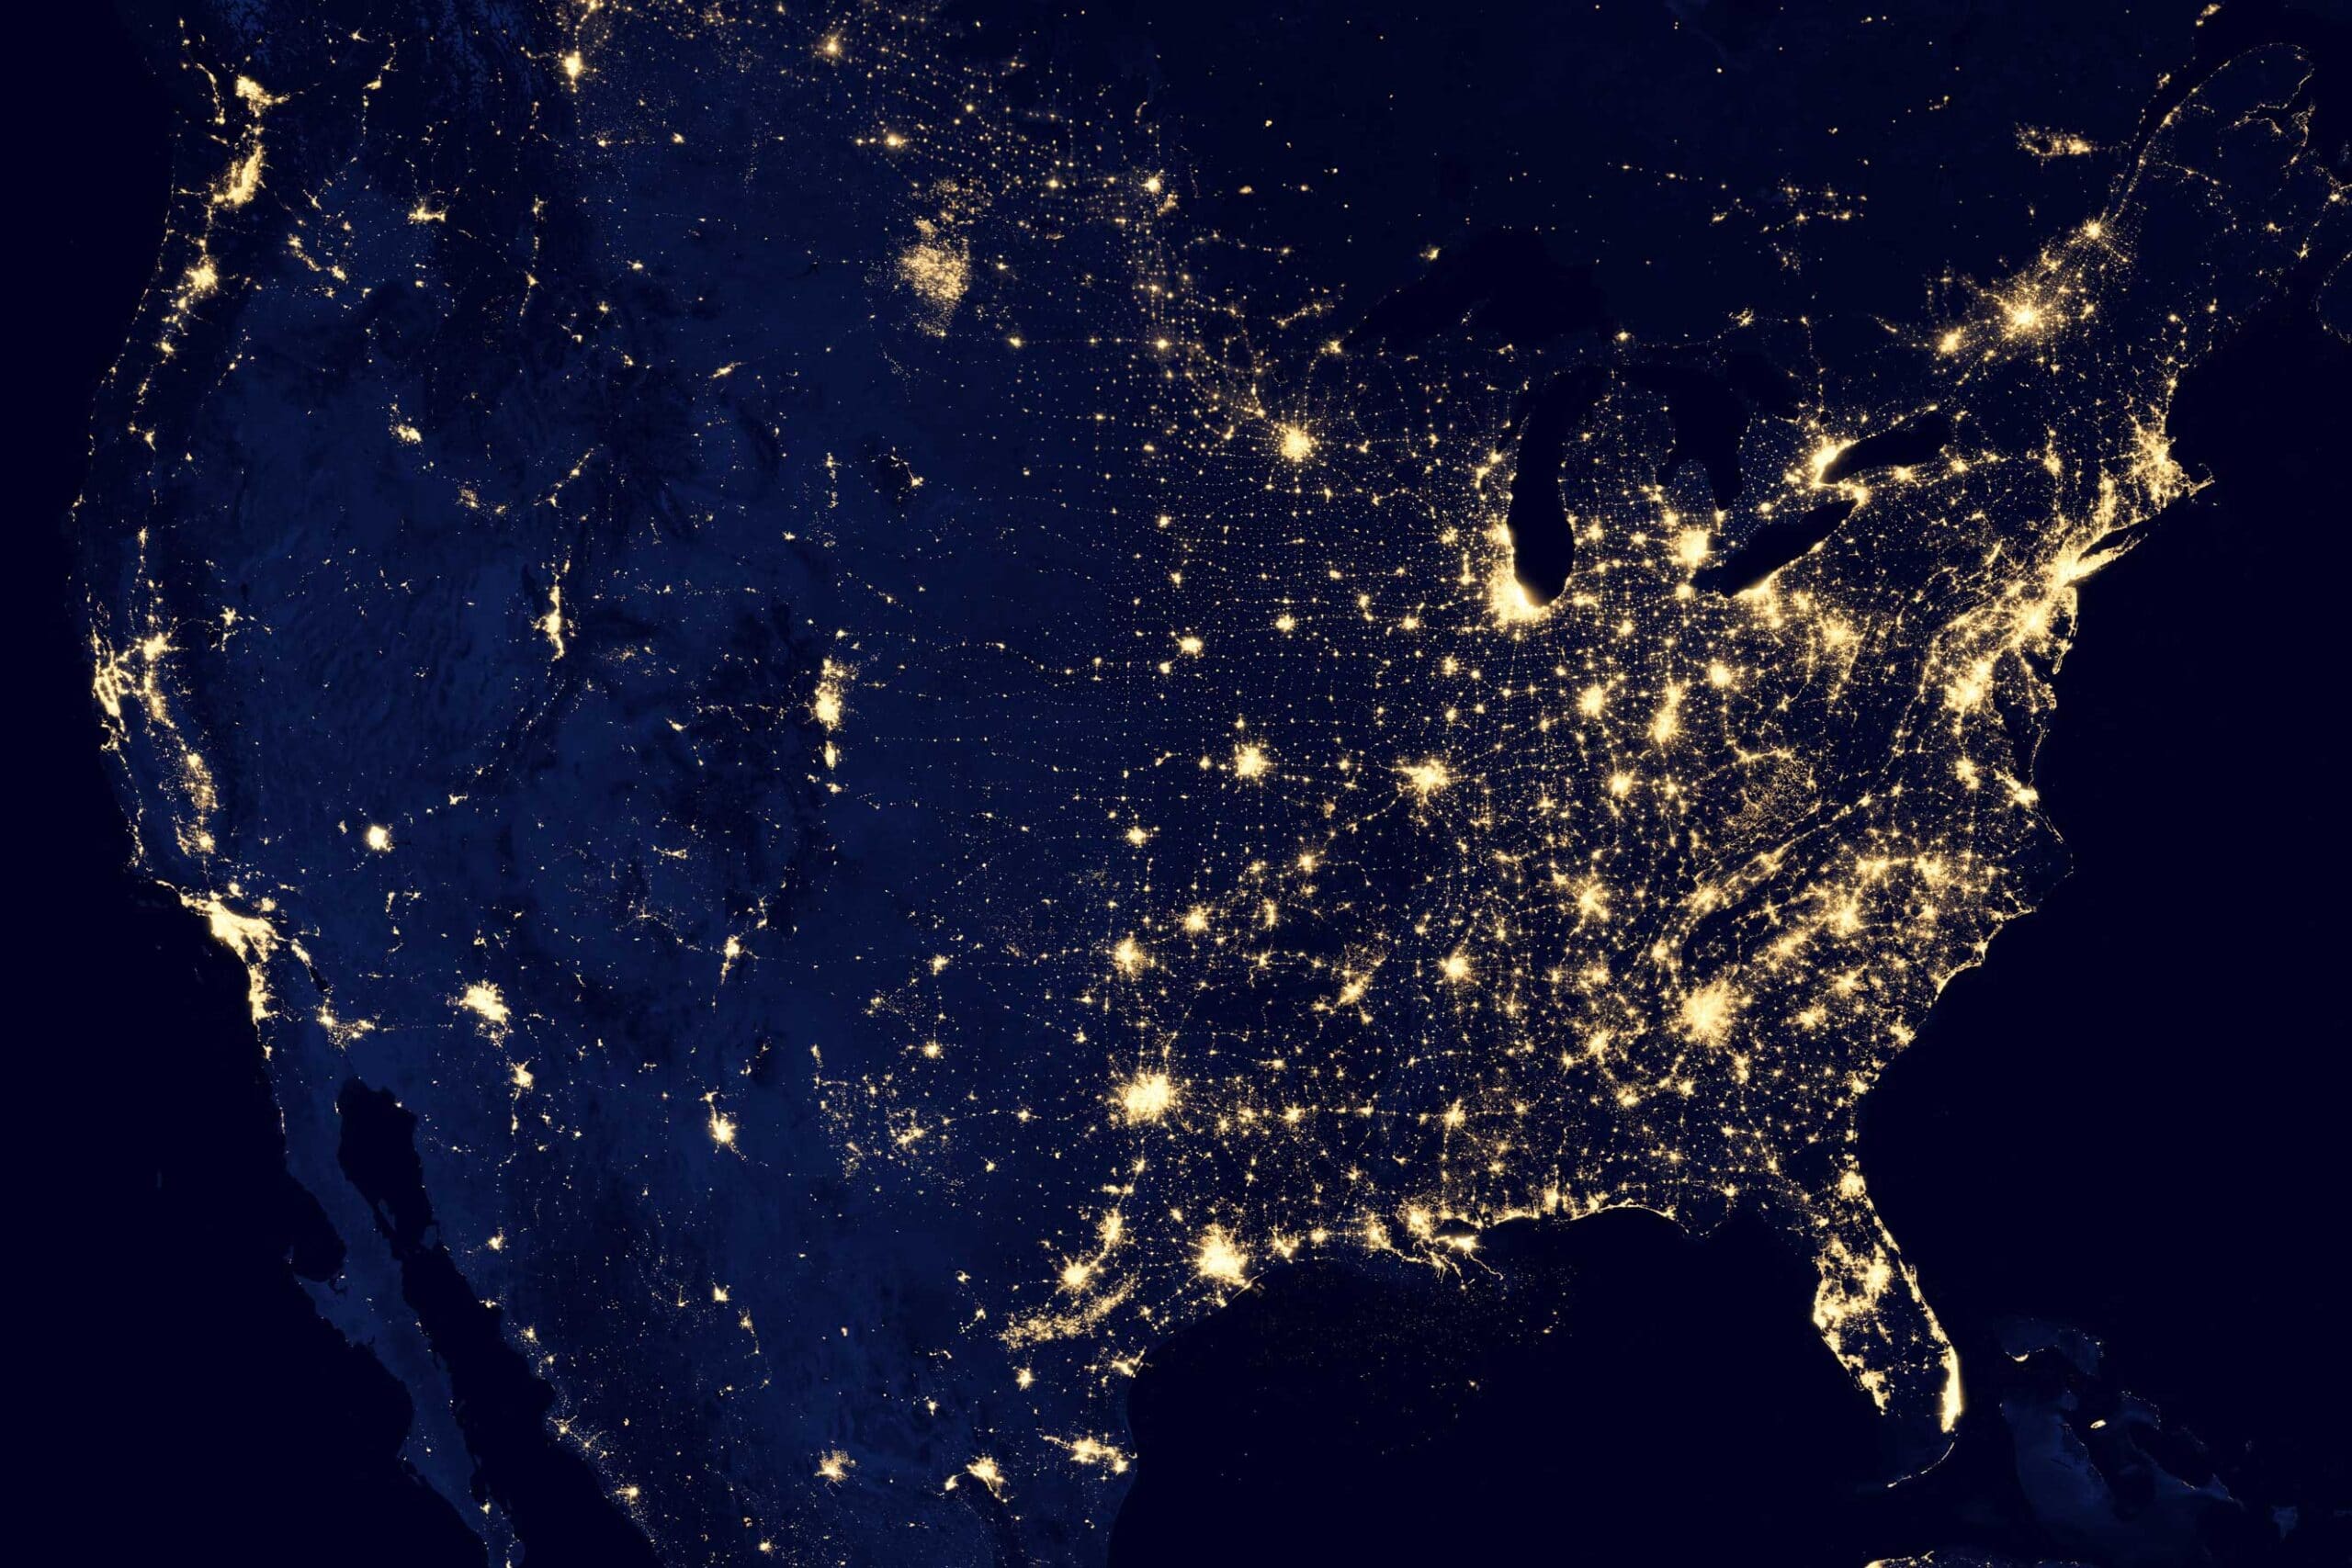 United States map showing bright lights over big cities